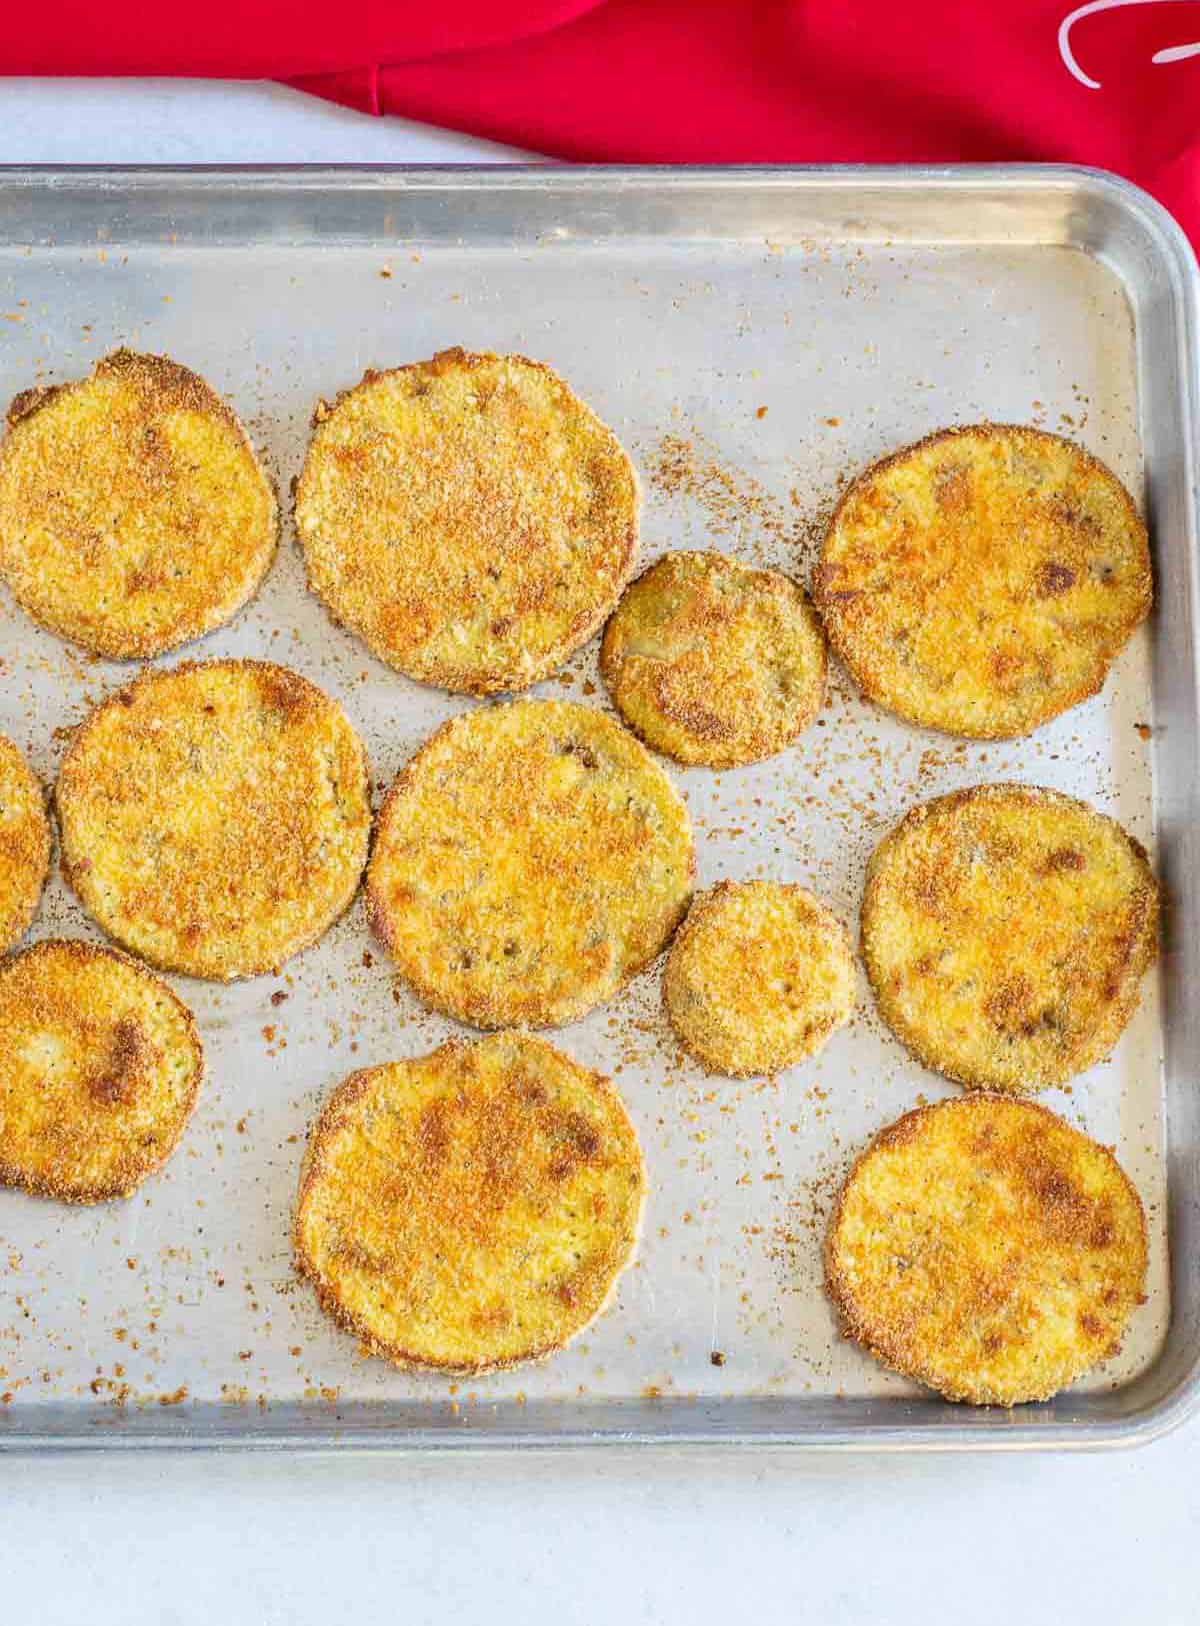 baked breaded eggplant slices in sheet pan